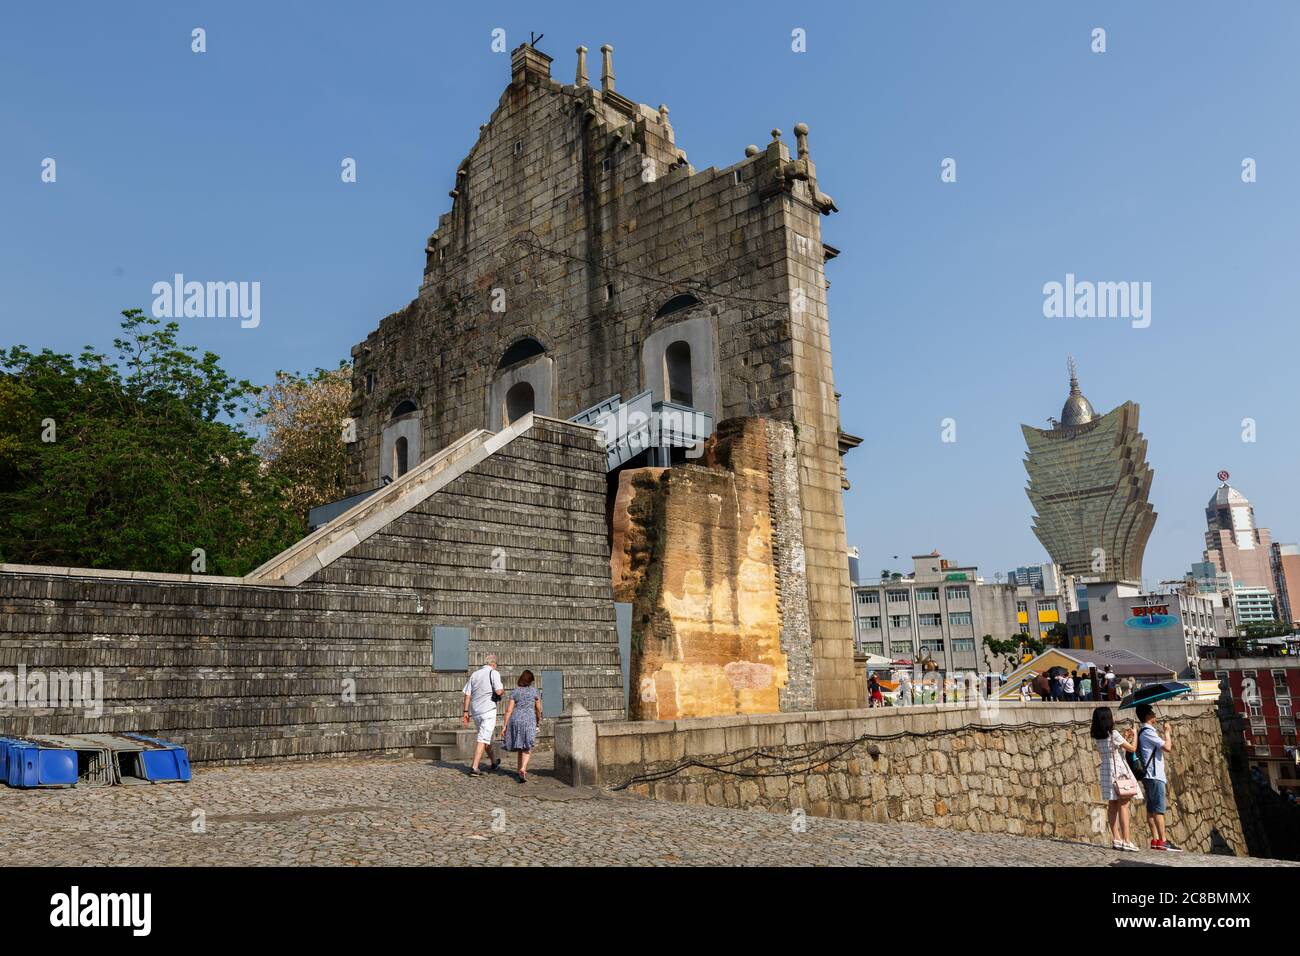 Macao, China - May 27, 2017: Backside view on ruins of Saint Paul's. The construction of the church was finished in 1640. It was destroyed by fire dur Stock Photo